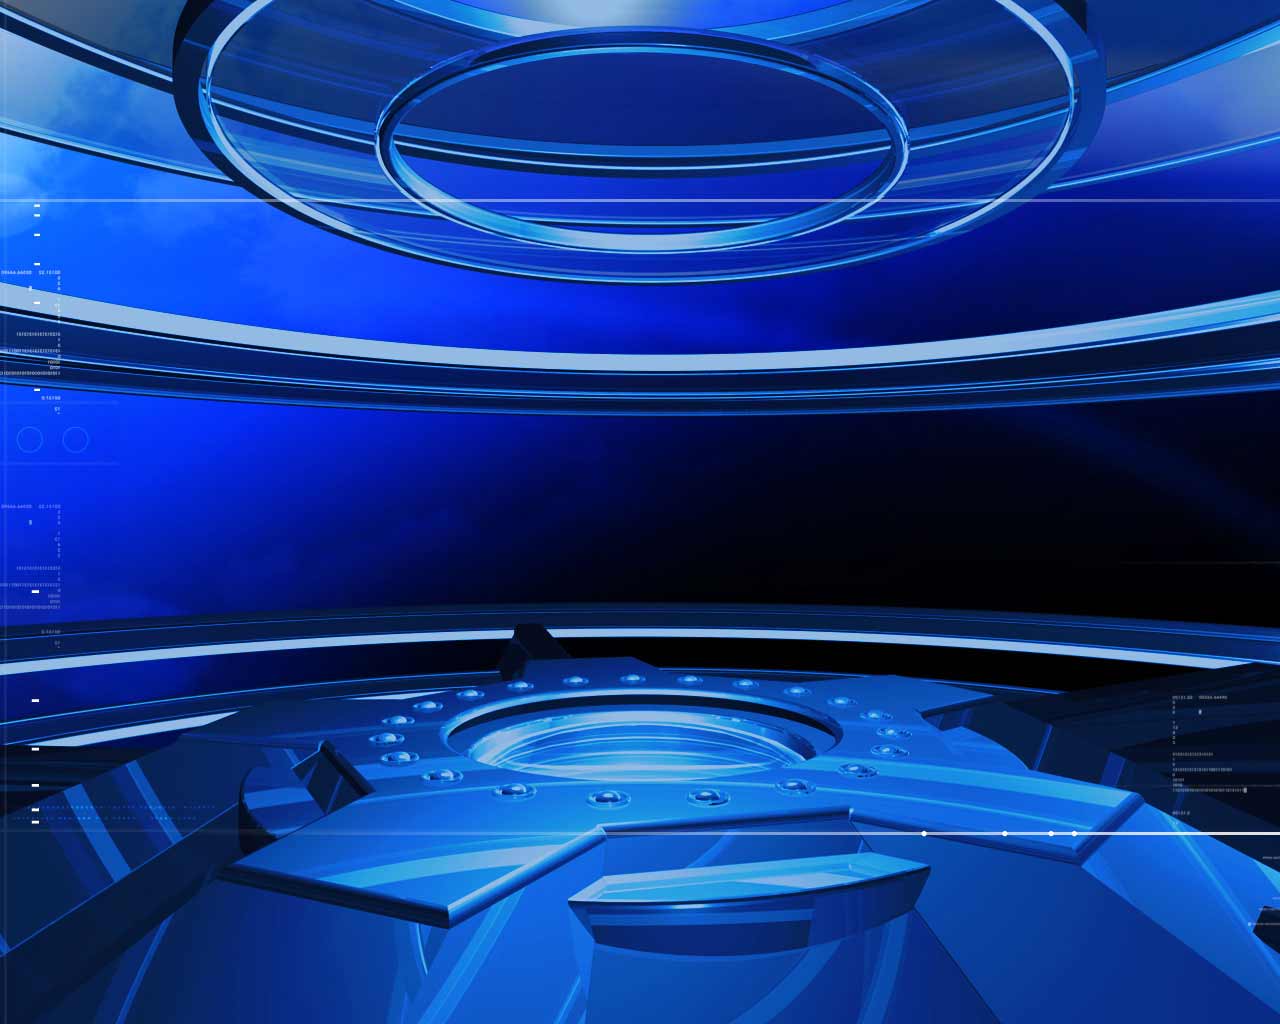 Free download News Room Backgrounds The background of our news